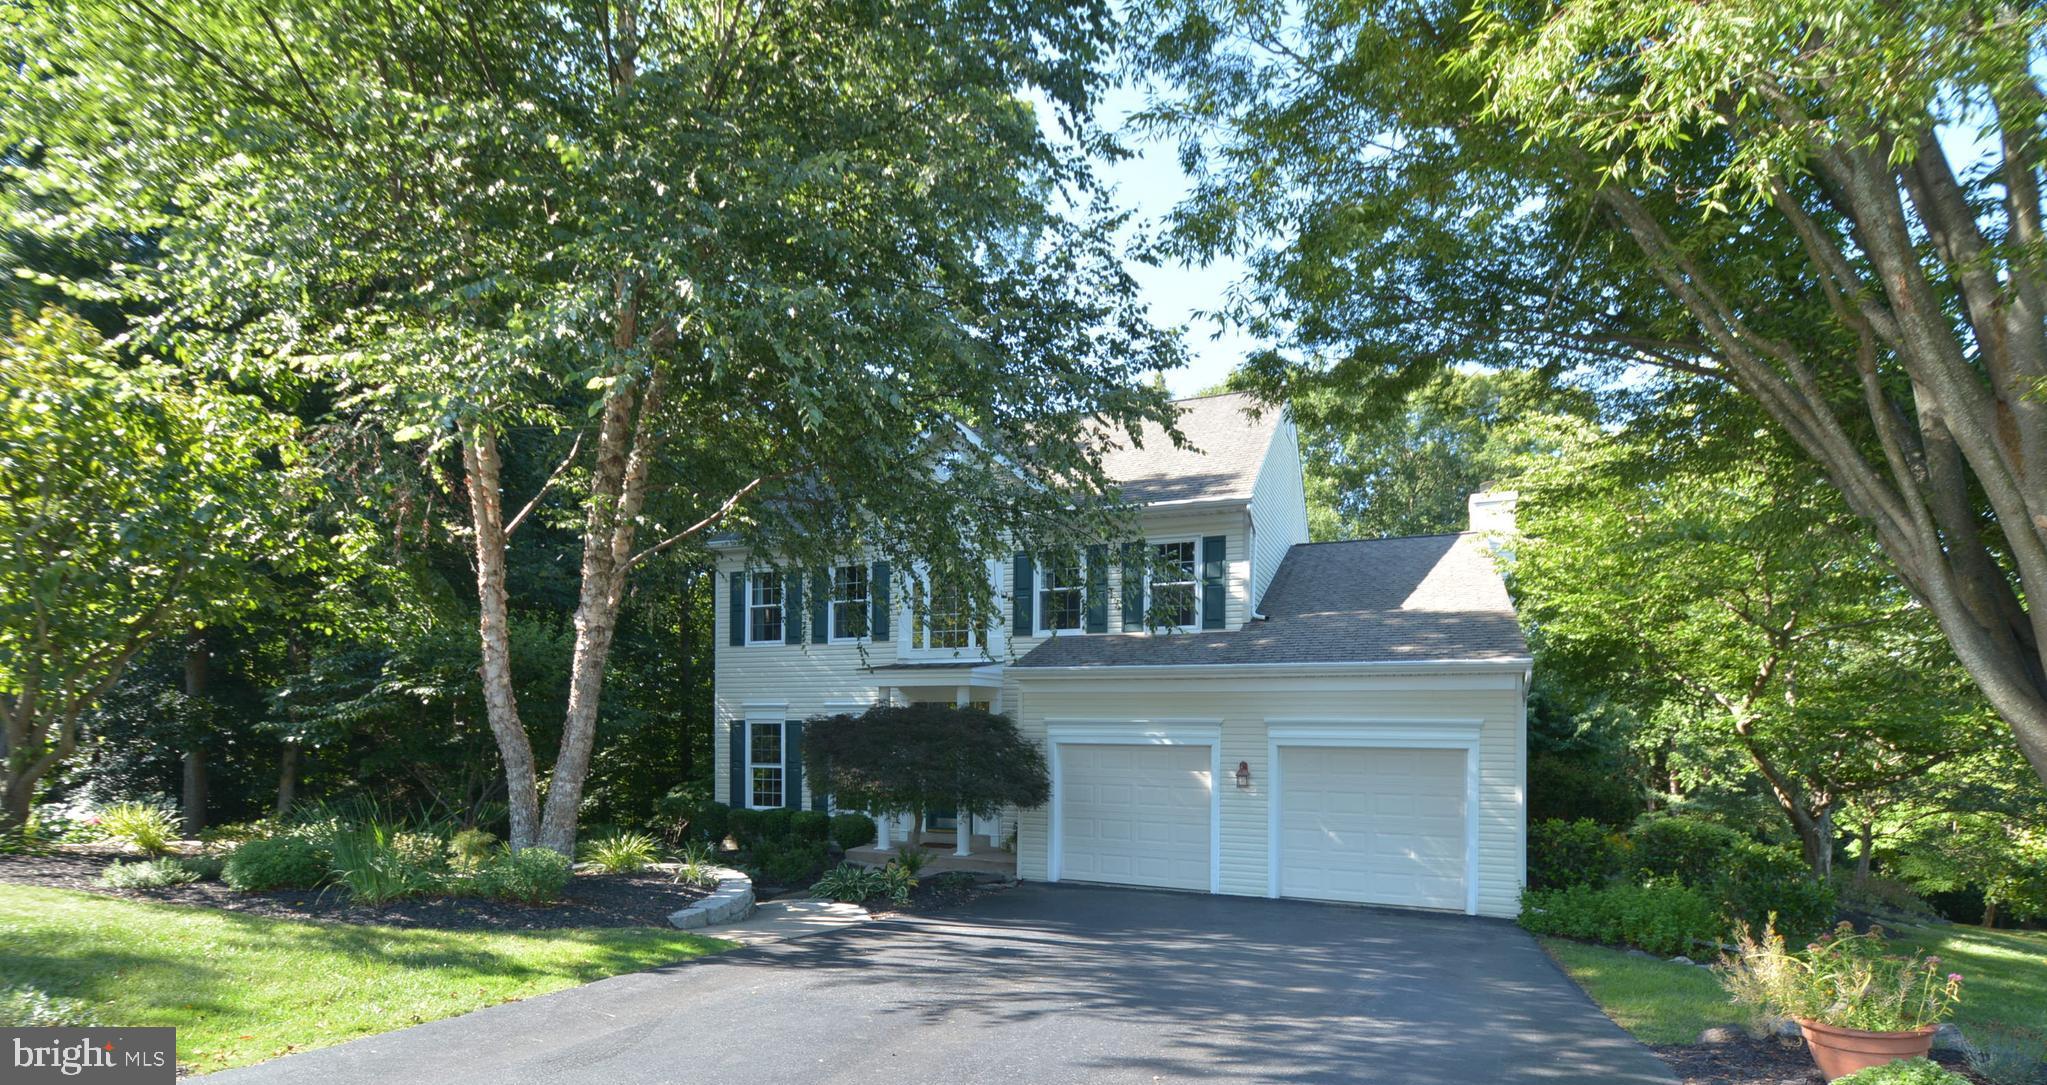 front view of a house with a tree